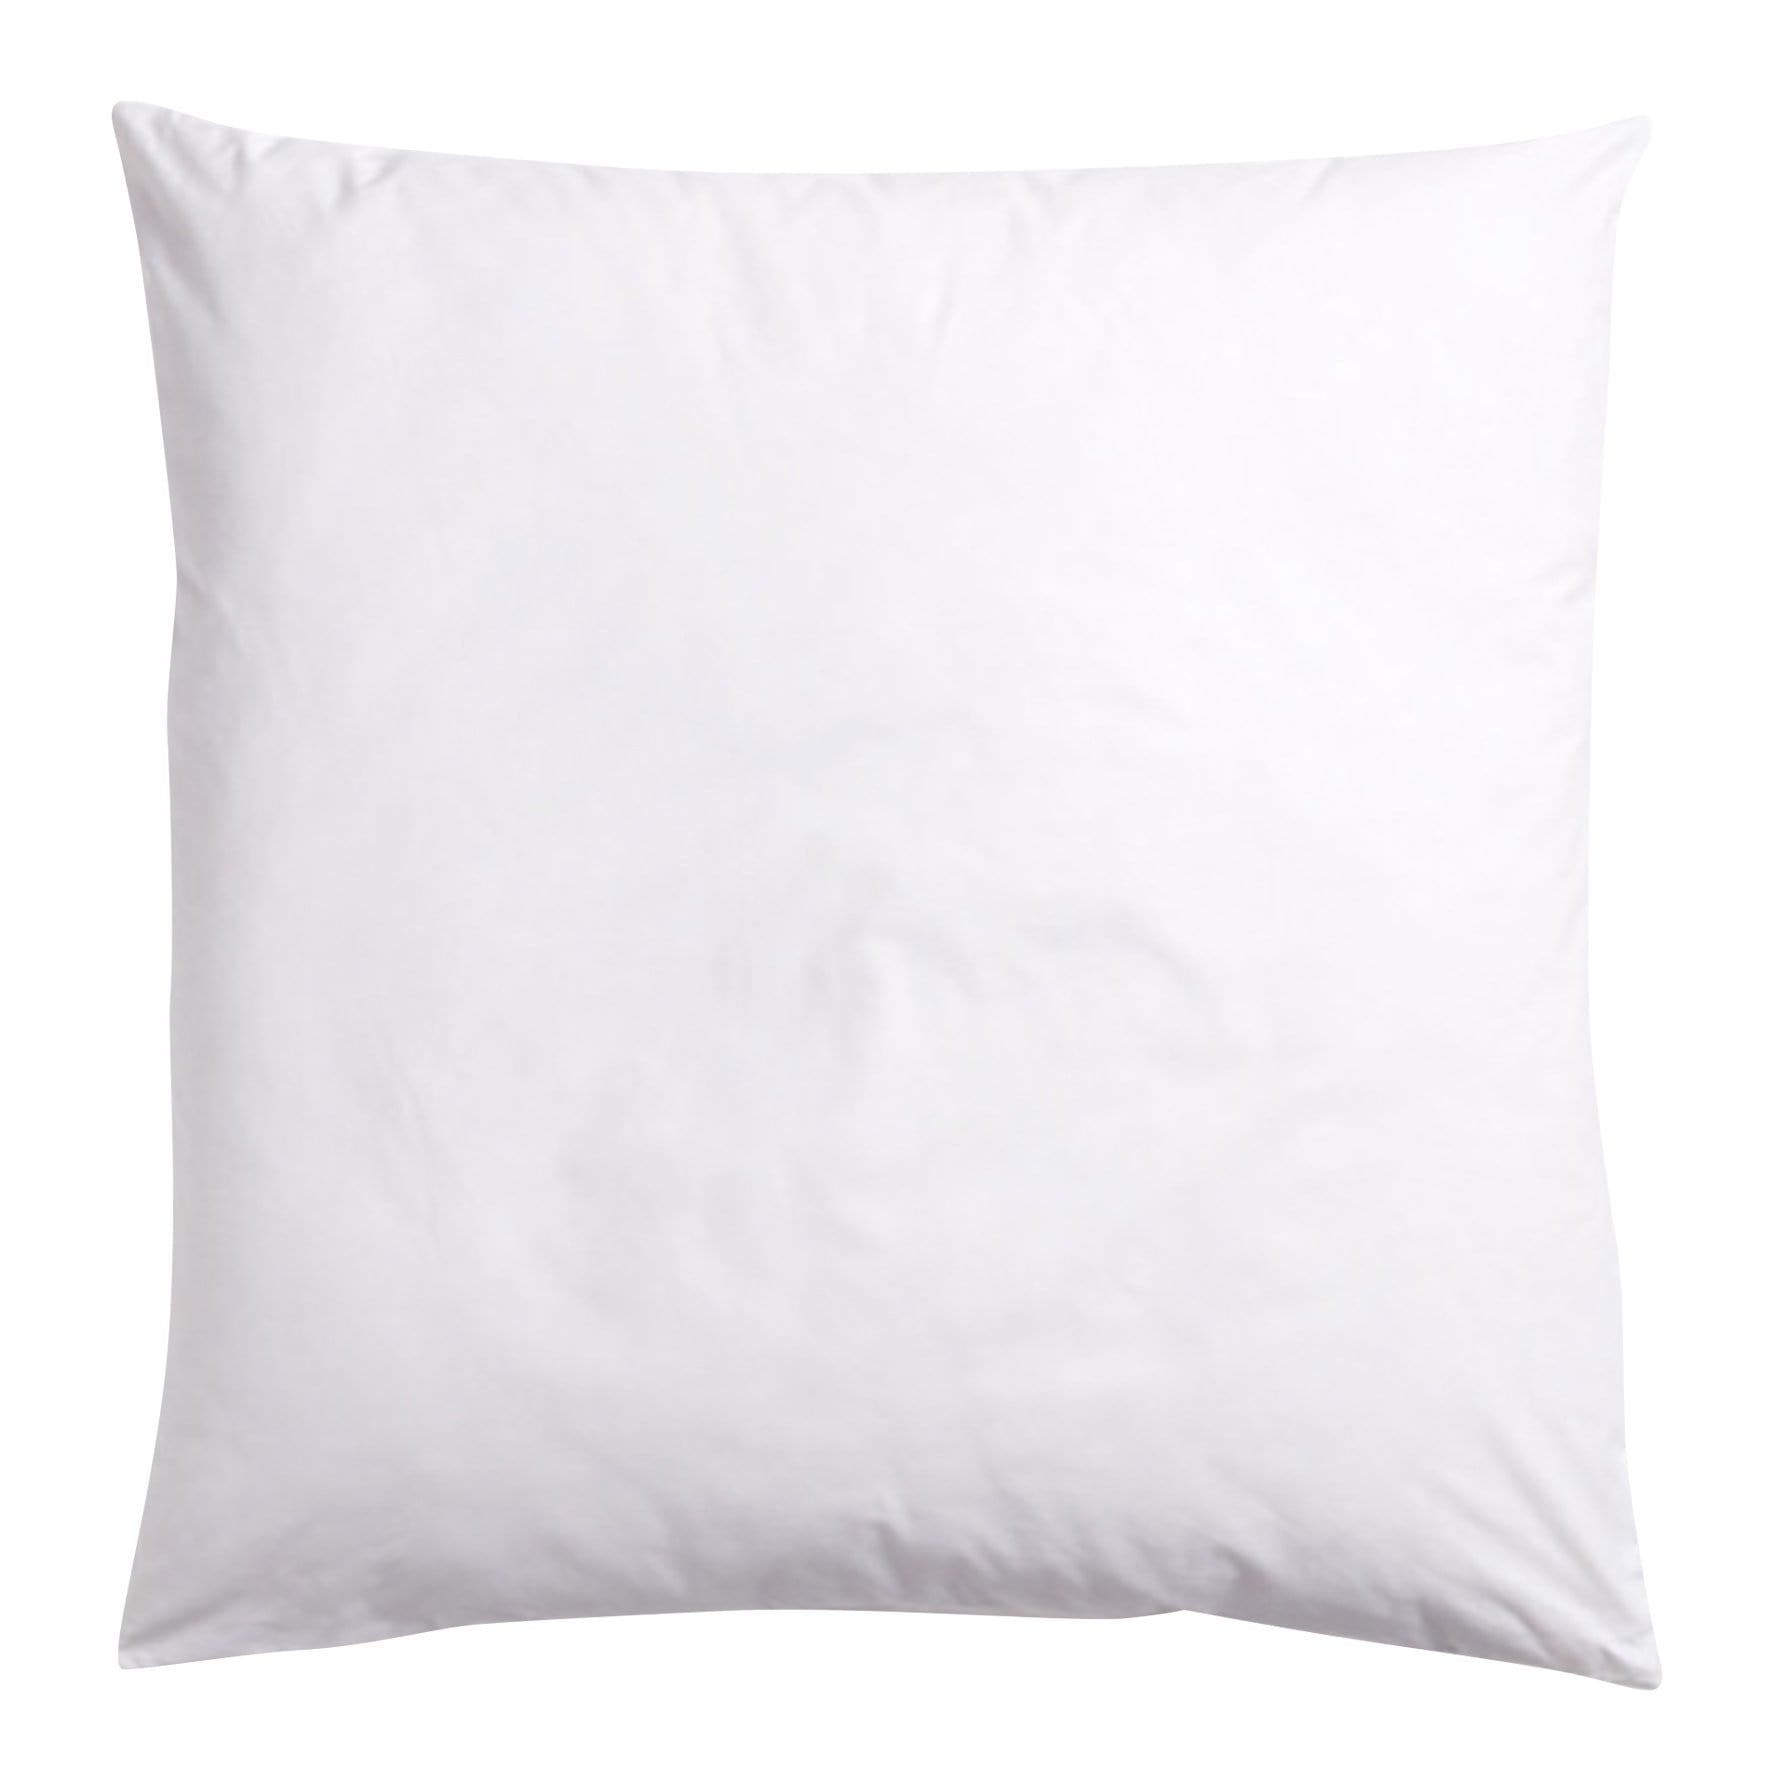 55x55cm Feather Cushion Inner to fit 50x50cm Cushion Cover